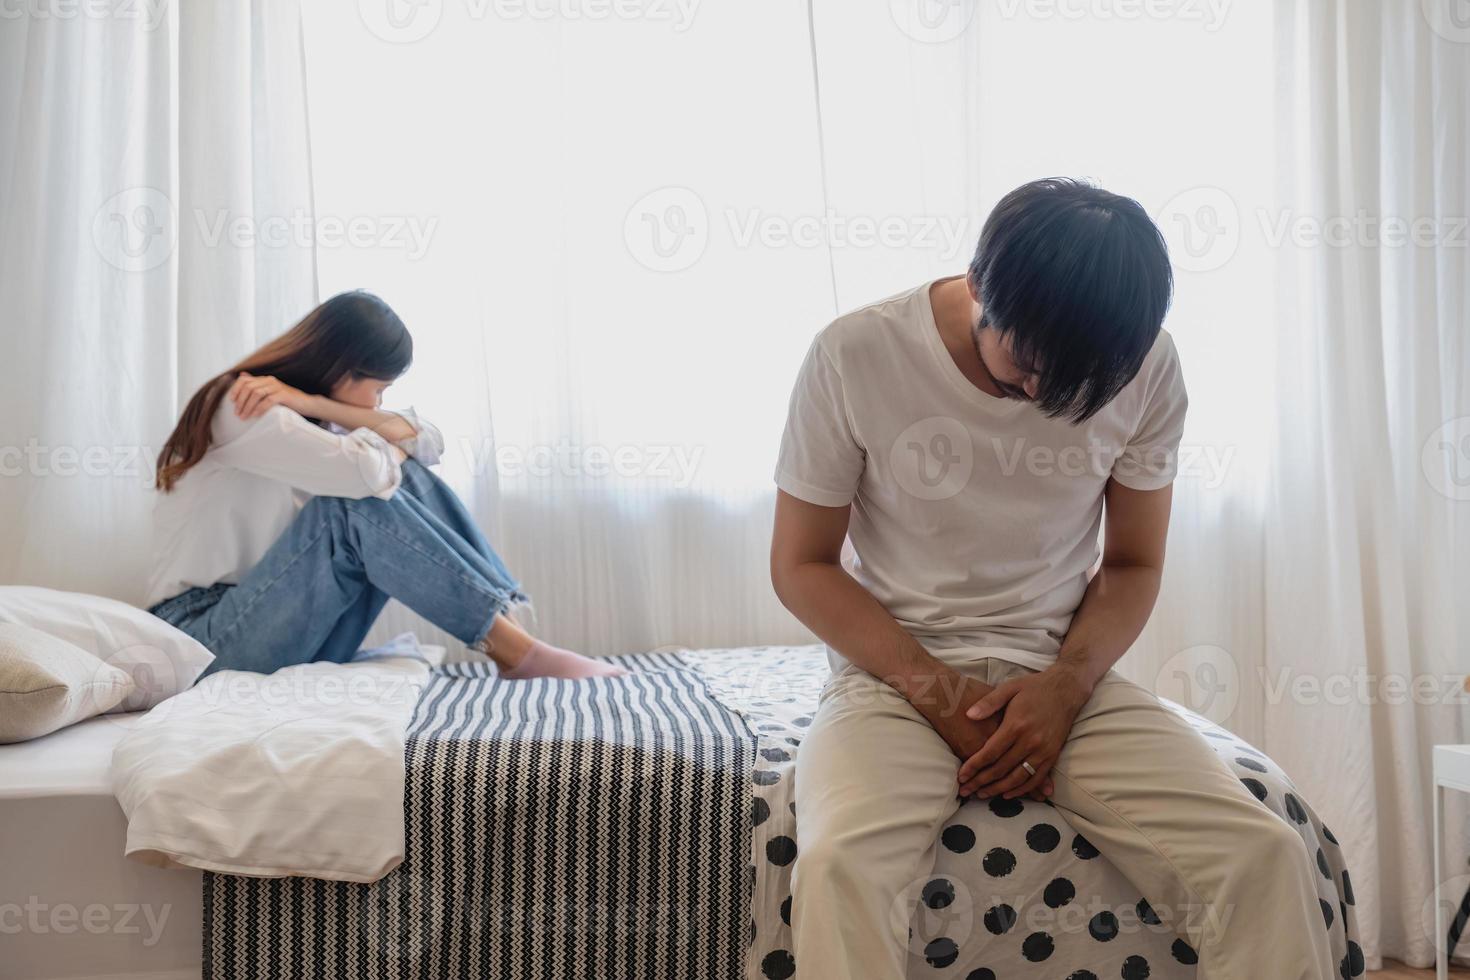 The husband is unhappy and disappointed in the erectile dysfunction during sex while his wife sleeping on the pic